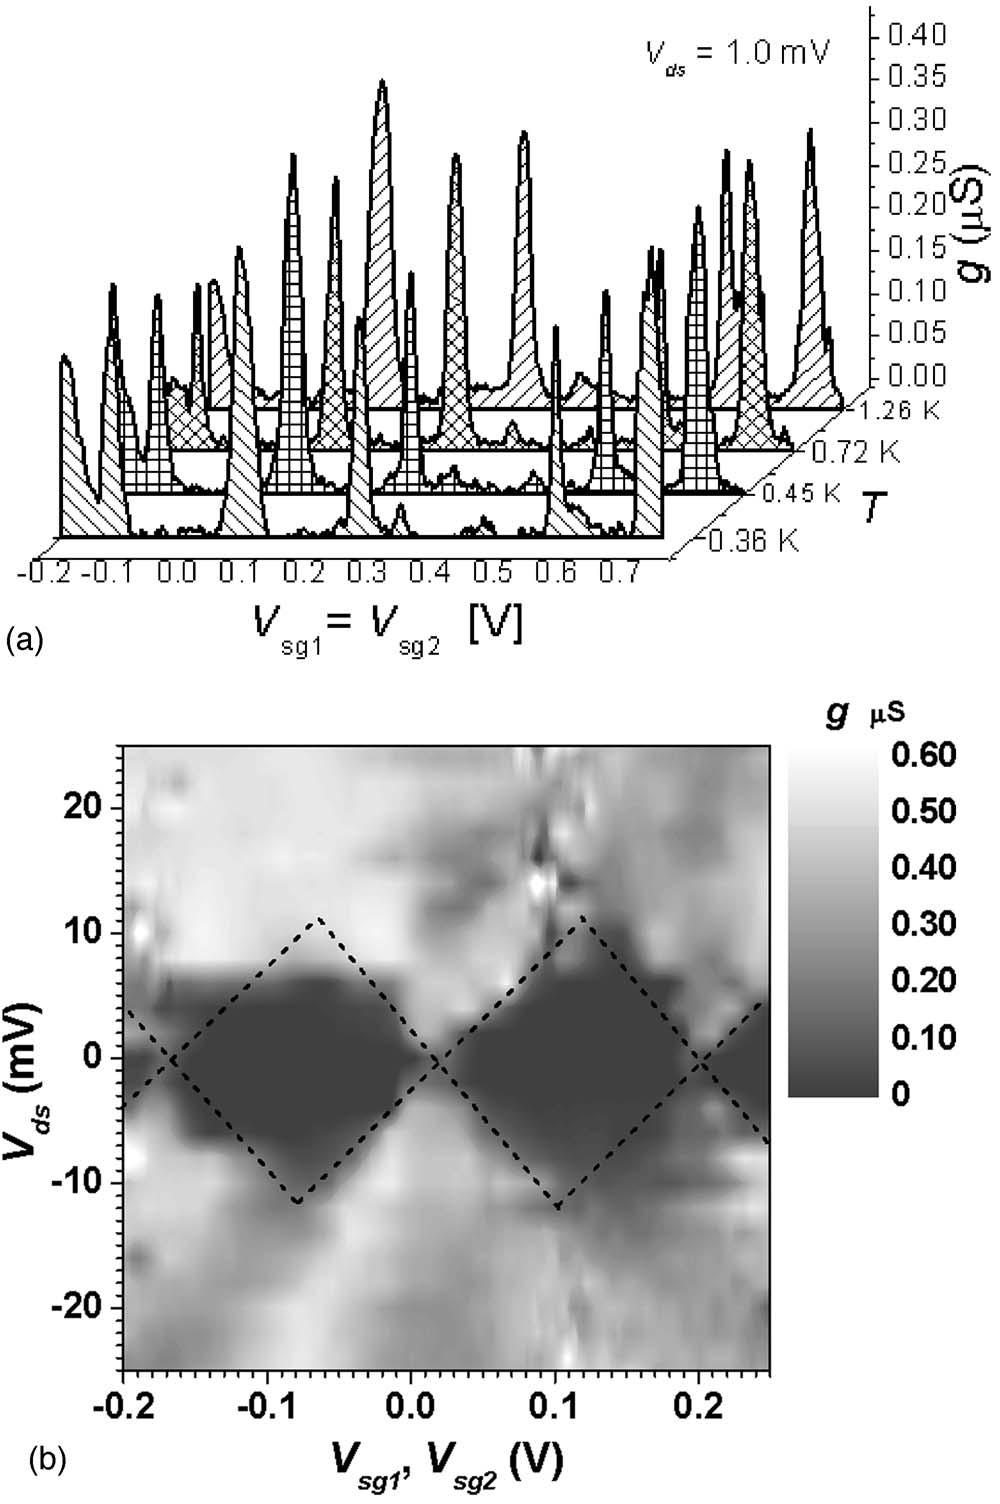 094317-4 Bo et al. J. Appl. Phys. 100, 094317 2006 FIG. 5. a Conductance vs gate voltage side gates connected together at drain-source bias of 1.0 mev at 0.36, 0.45, 0.72, and 1.